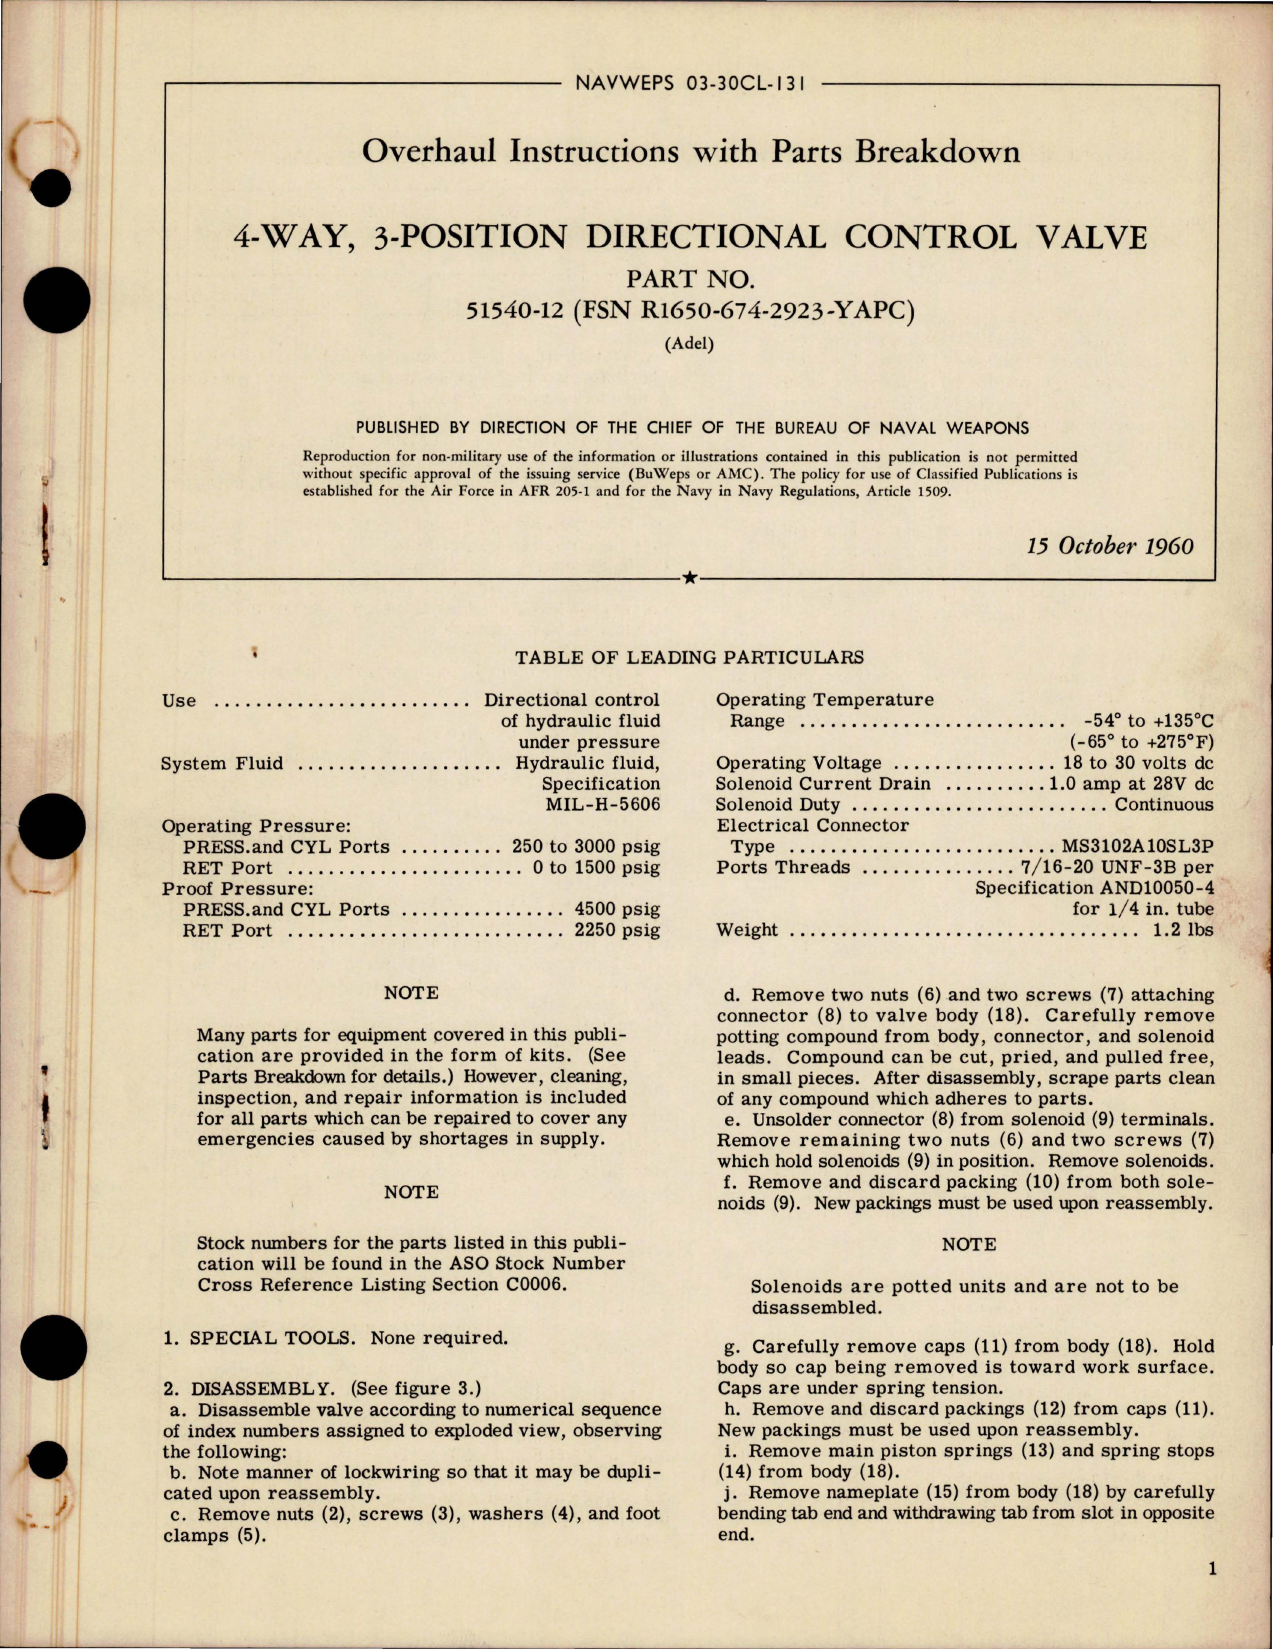 Sample page 1 from AirCorps Library document: Overhaul Instructions with Parts Breakdown for 4-Way, 3-Position Directional Control Valve - Part 51540-12